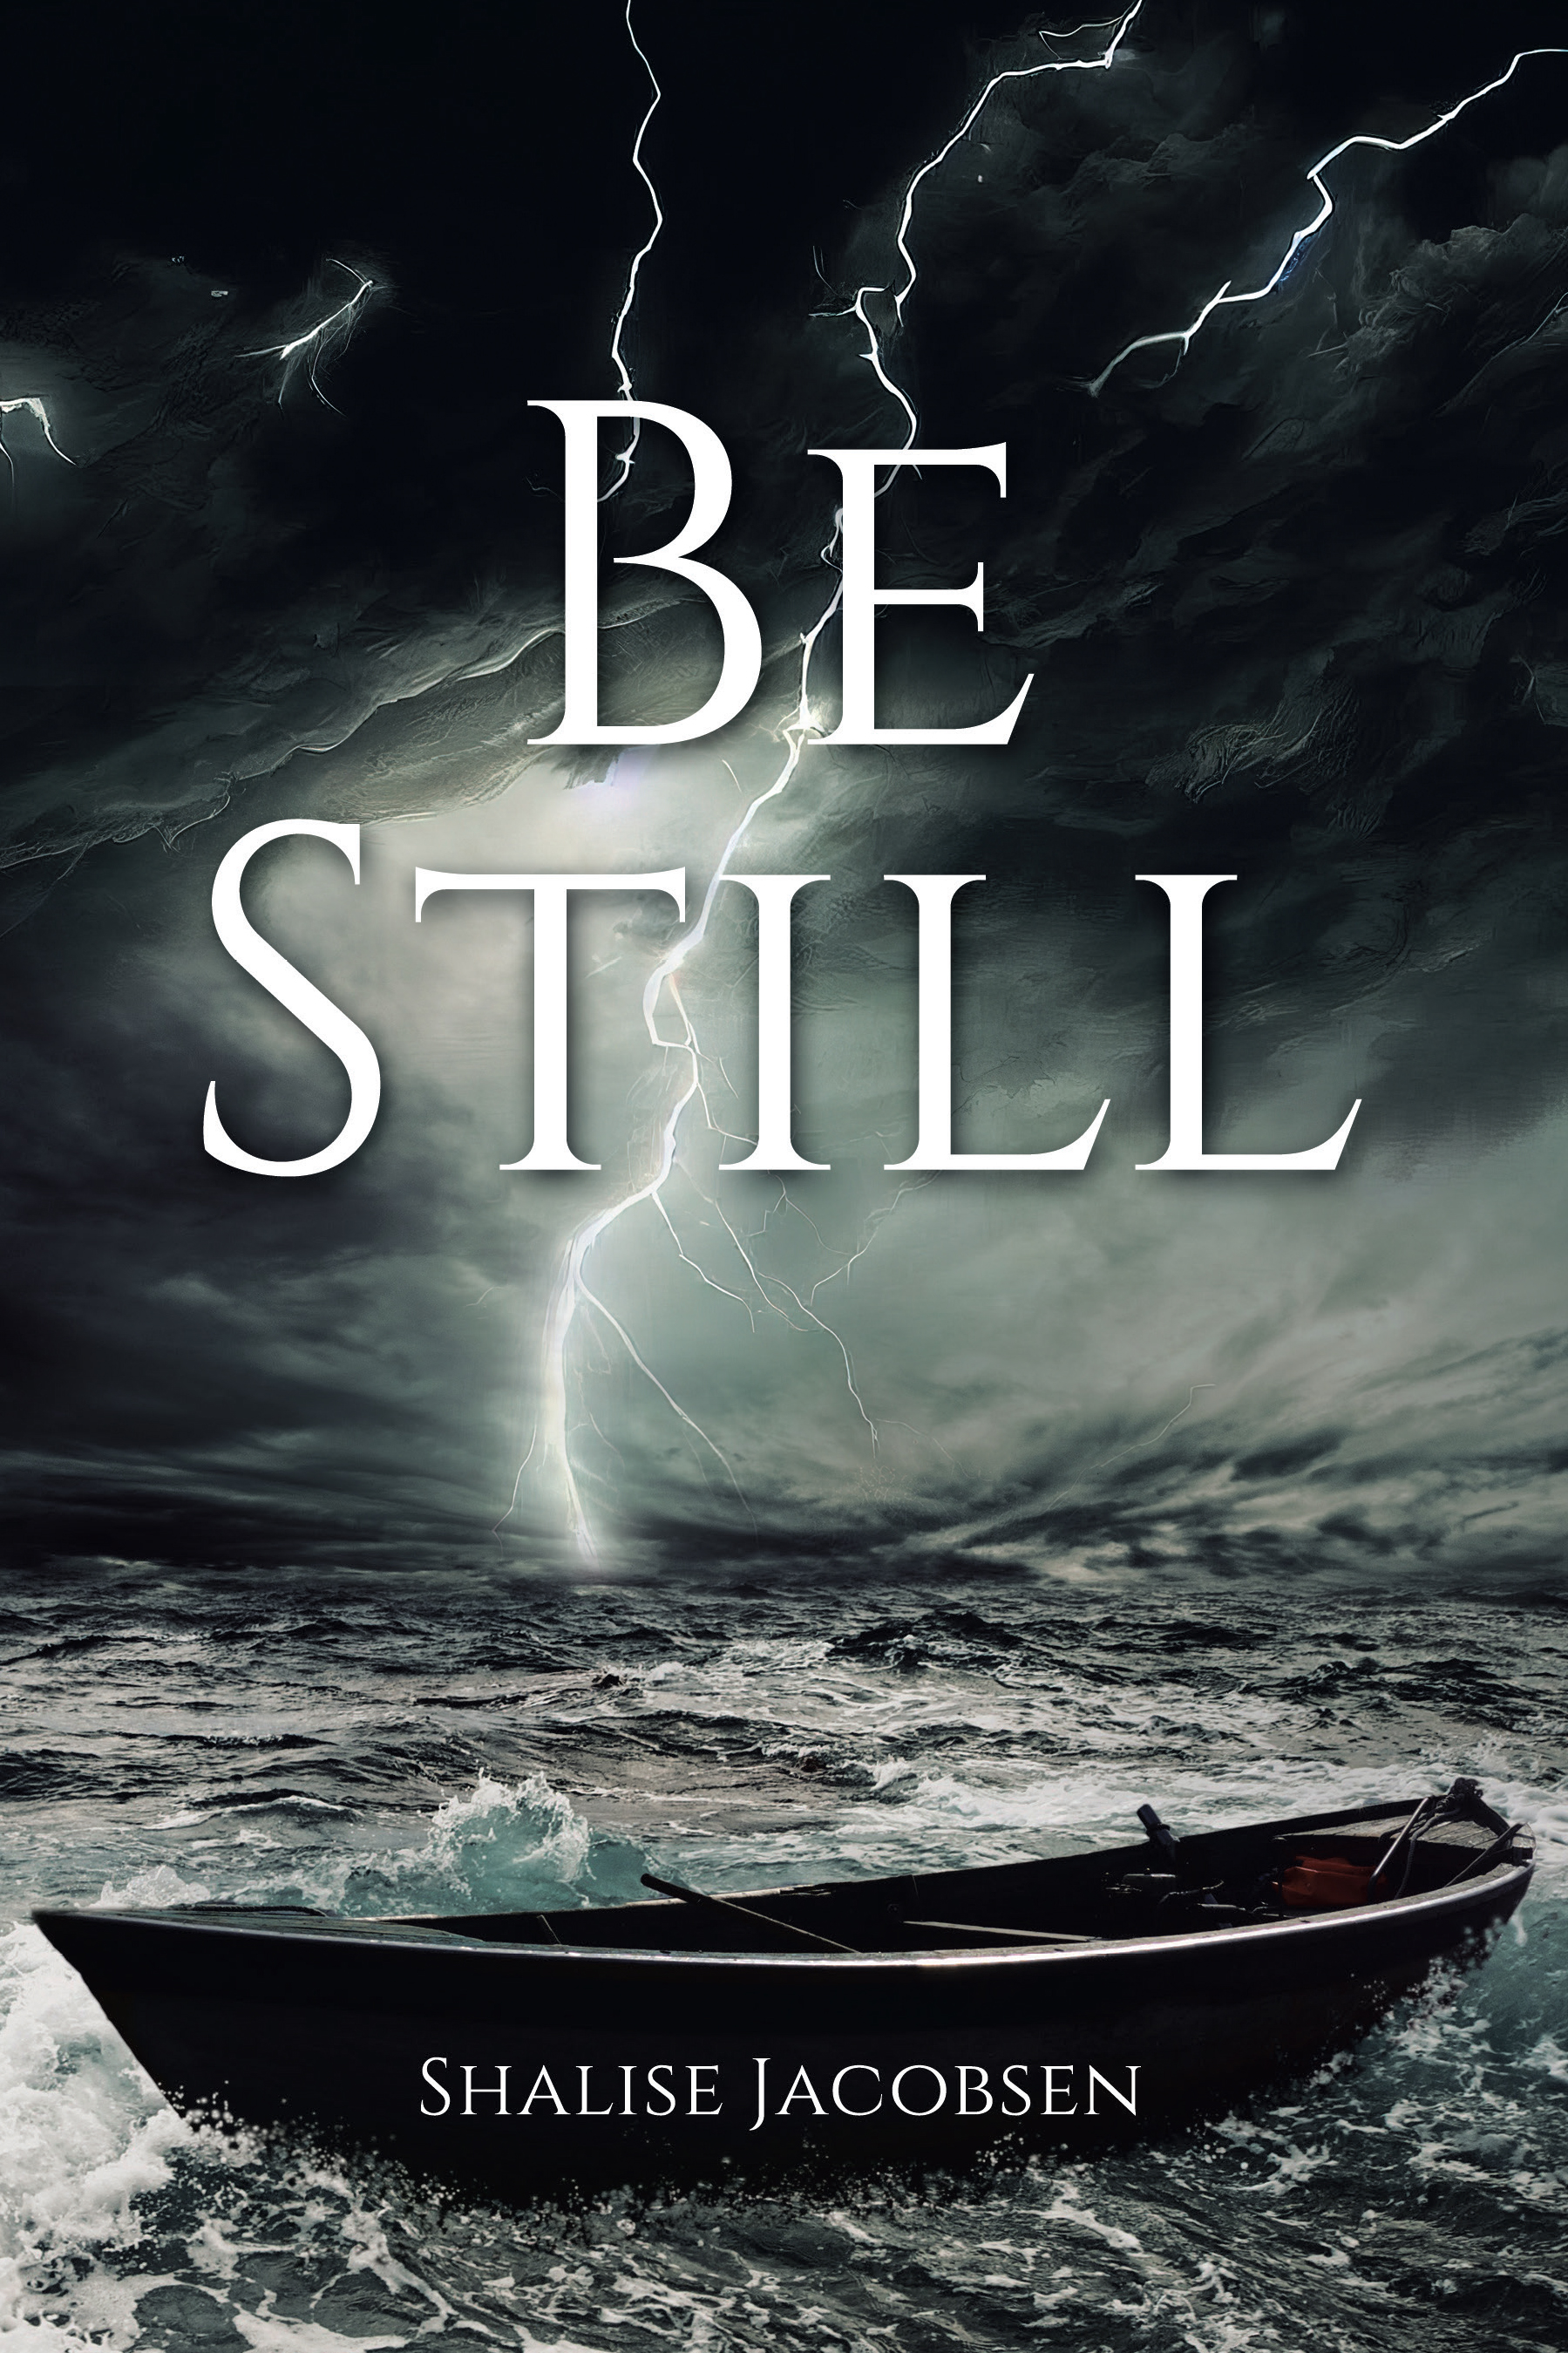 "Be Still," by Shalise Jacobsen, Tells of Her Faith Through Many Personal Challenges, Including a Failed Marriage to a Homosexual Man and Struggles as a Single Mother